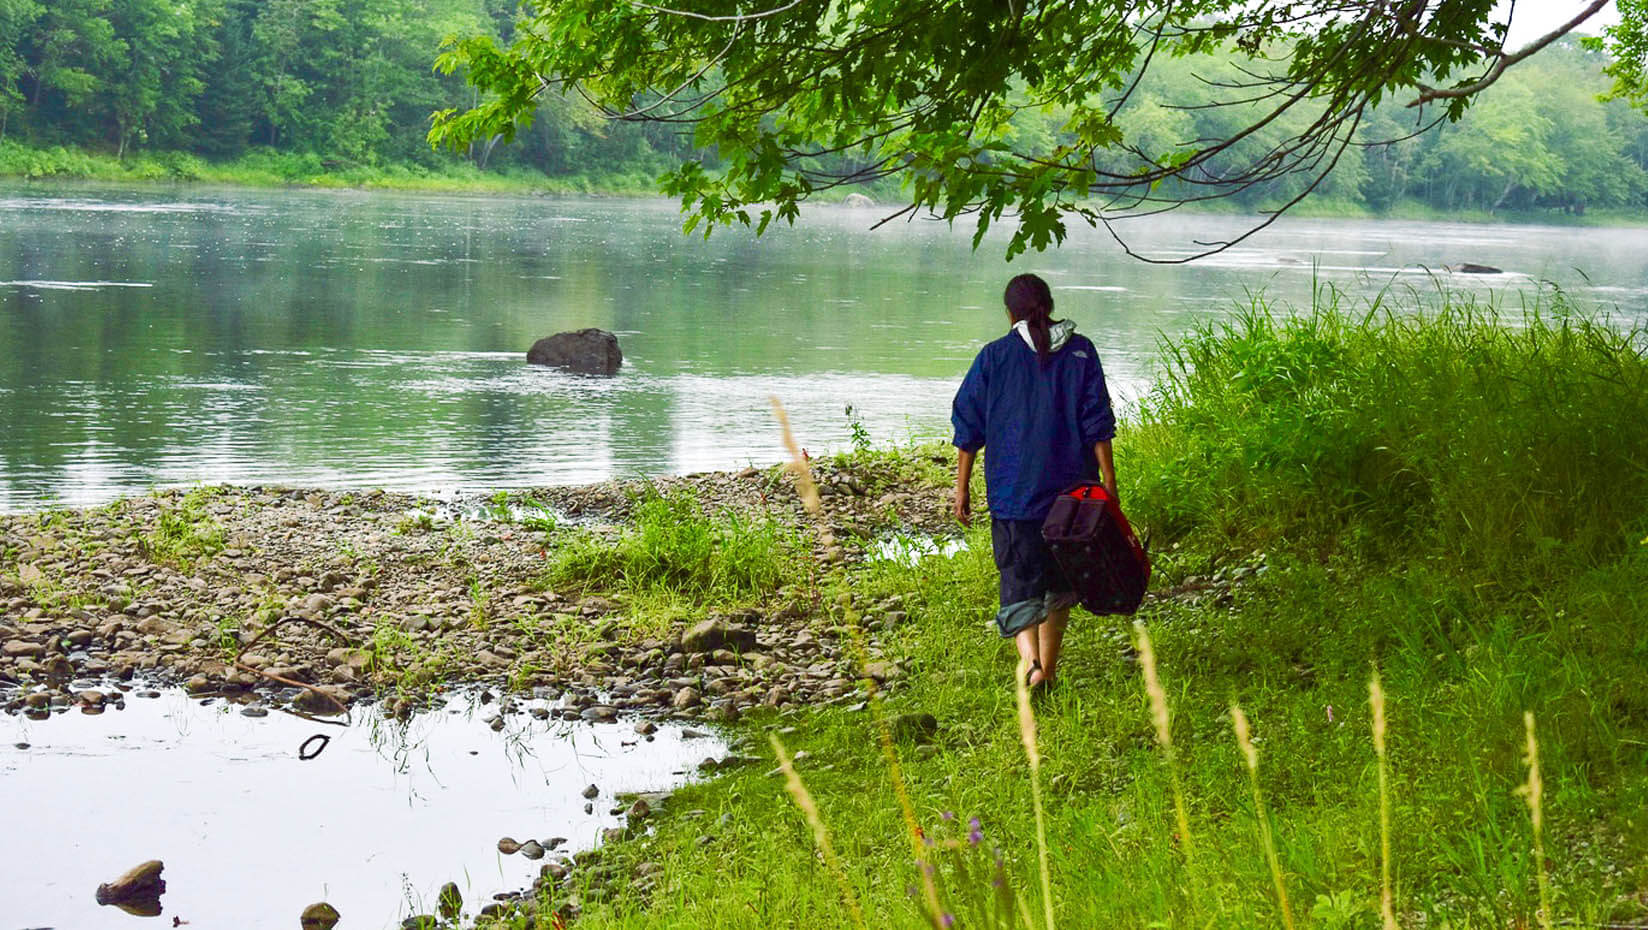 A person walks next to a river